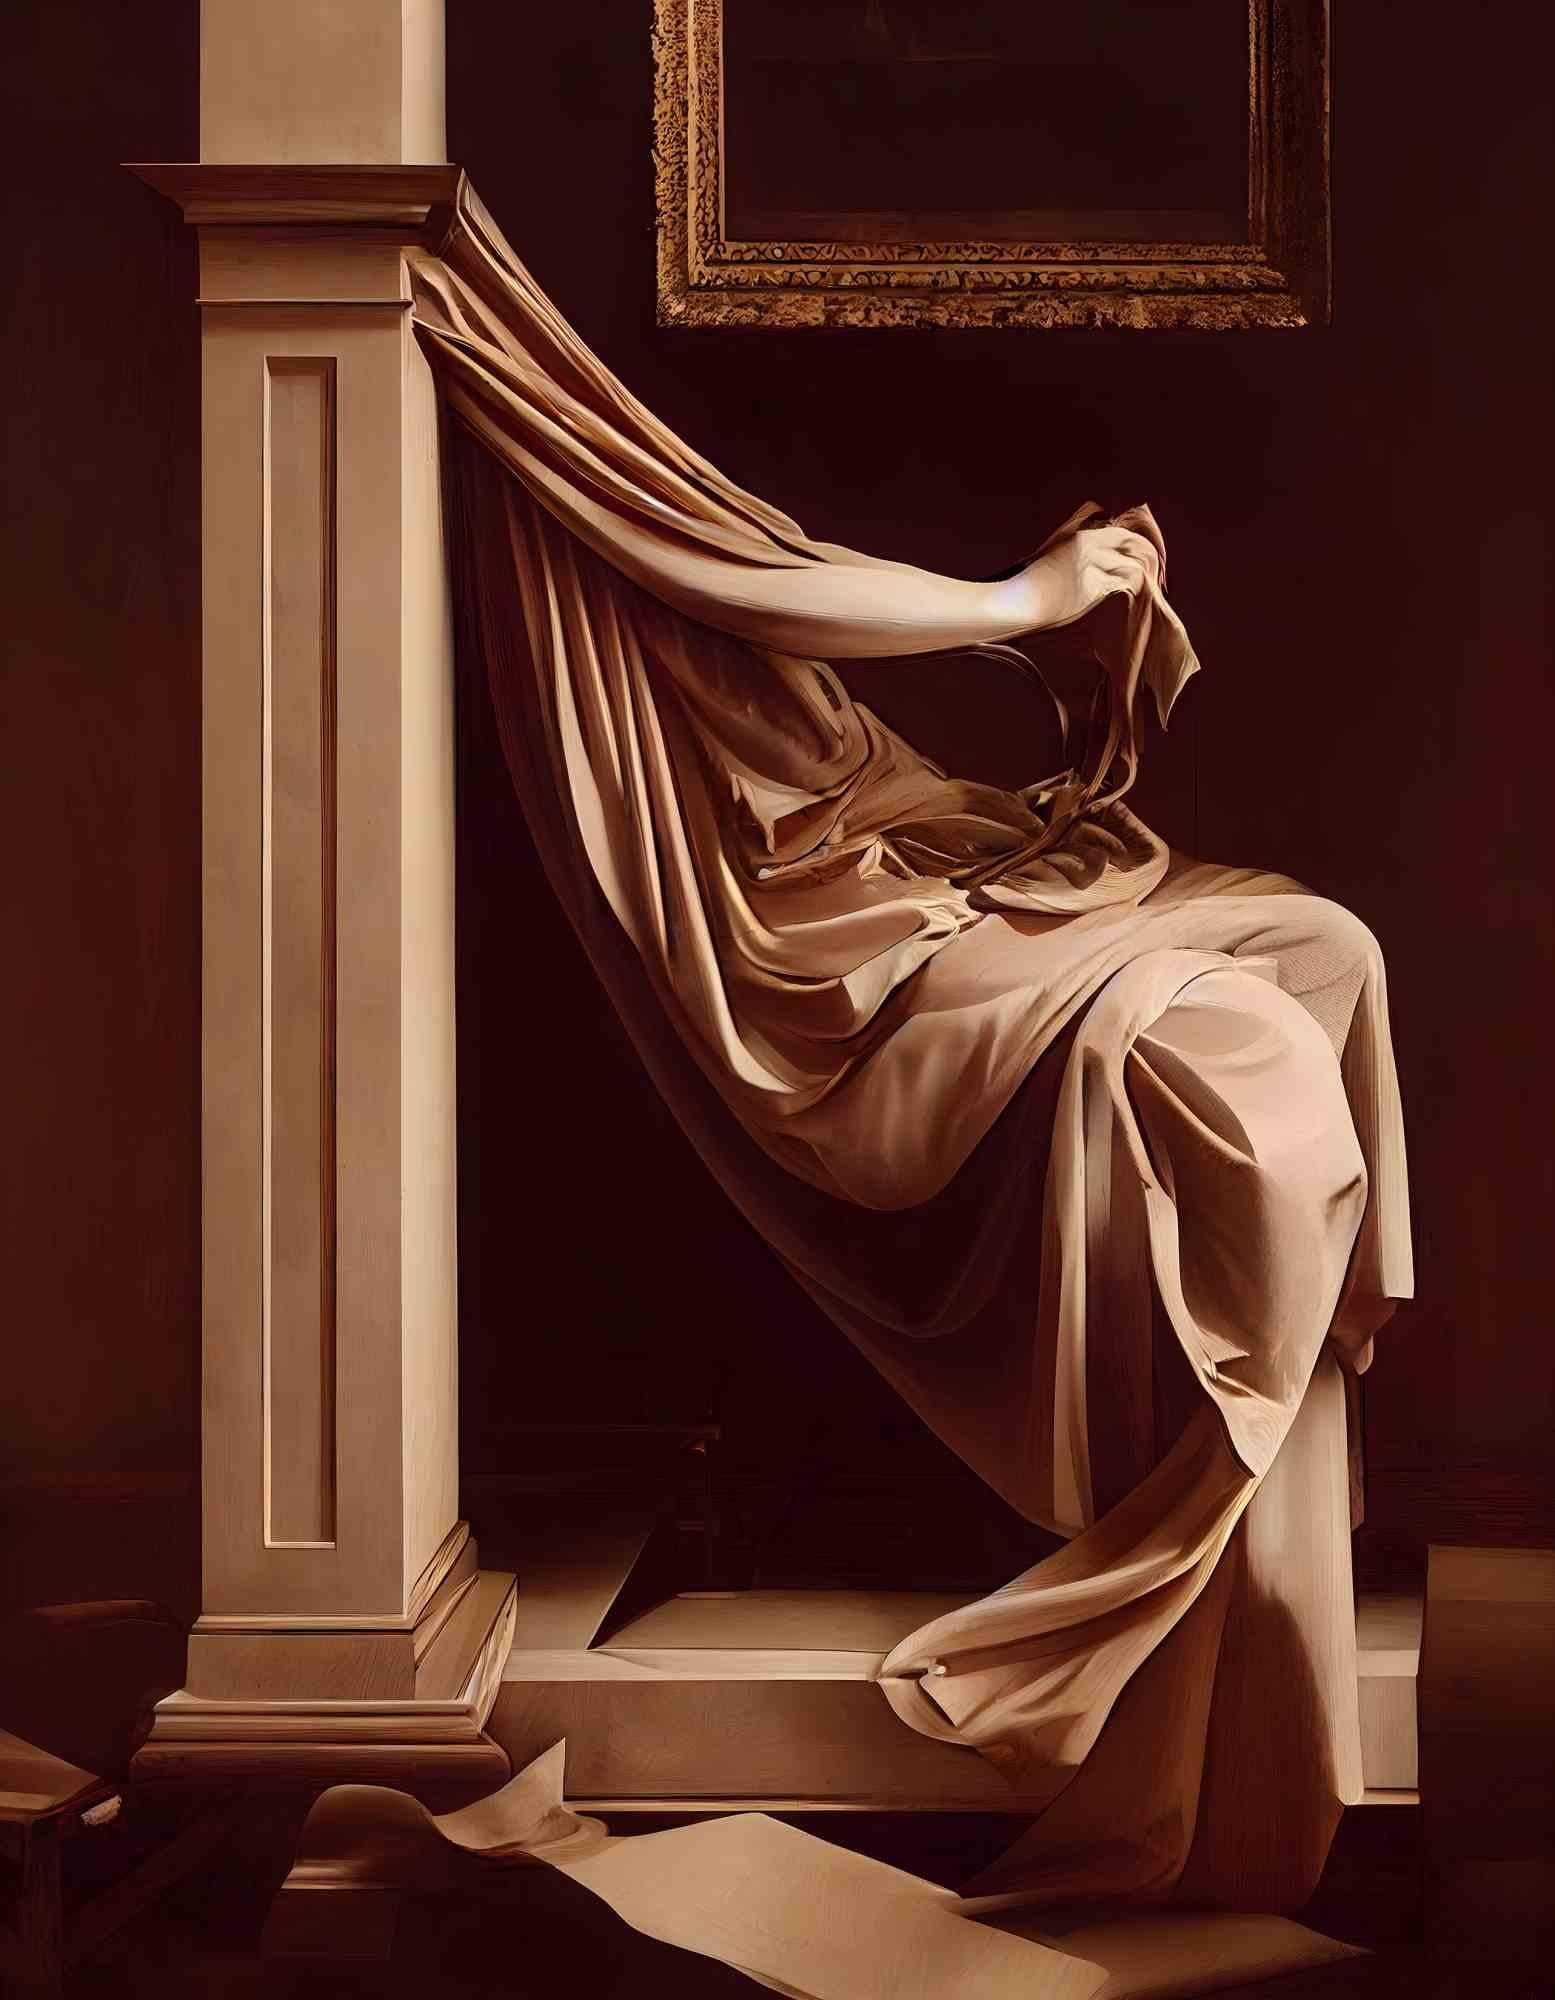 Delicate Desires is a masterpiece what represents celebration of artistic synergy, where romantic architecture and the human form intertwine with seamless elegance, enveloped by the tender touch of delicate silk. The composition exudes a sense of